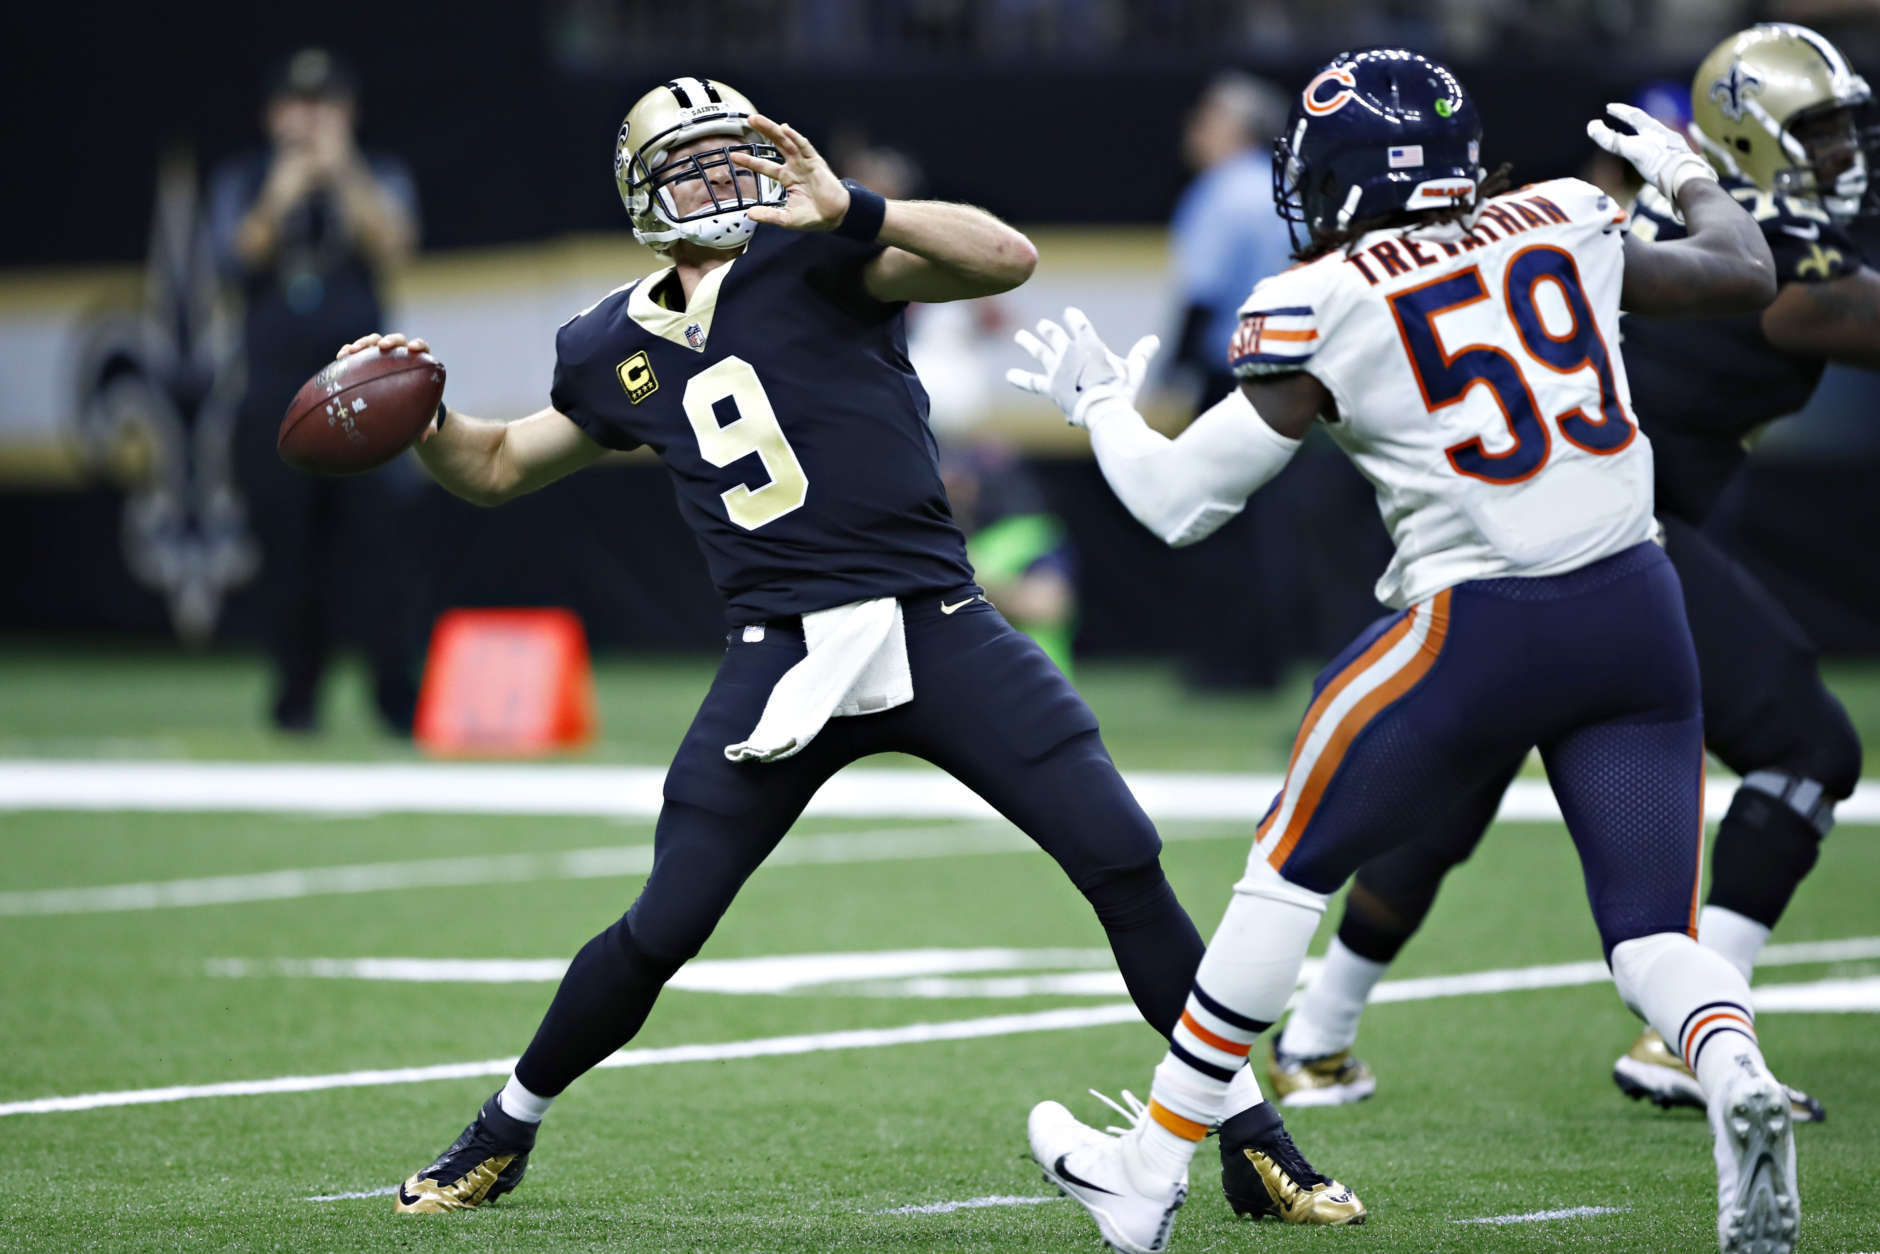 NEW ORLEANS, LA - OCTOBER 29:  Drew Brees #9 of the New Orleans Saints throws a deep pass in the fourth quarter during a game against the Chicago Bears at Mercedes-Benz Superdome on October 29, 2017 in New Orleans, Louisiana.  The Saints defeated the Bears 20-12.  (Photo by Wesley Hitt/Getty Images)